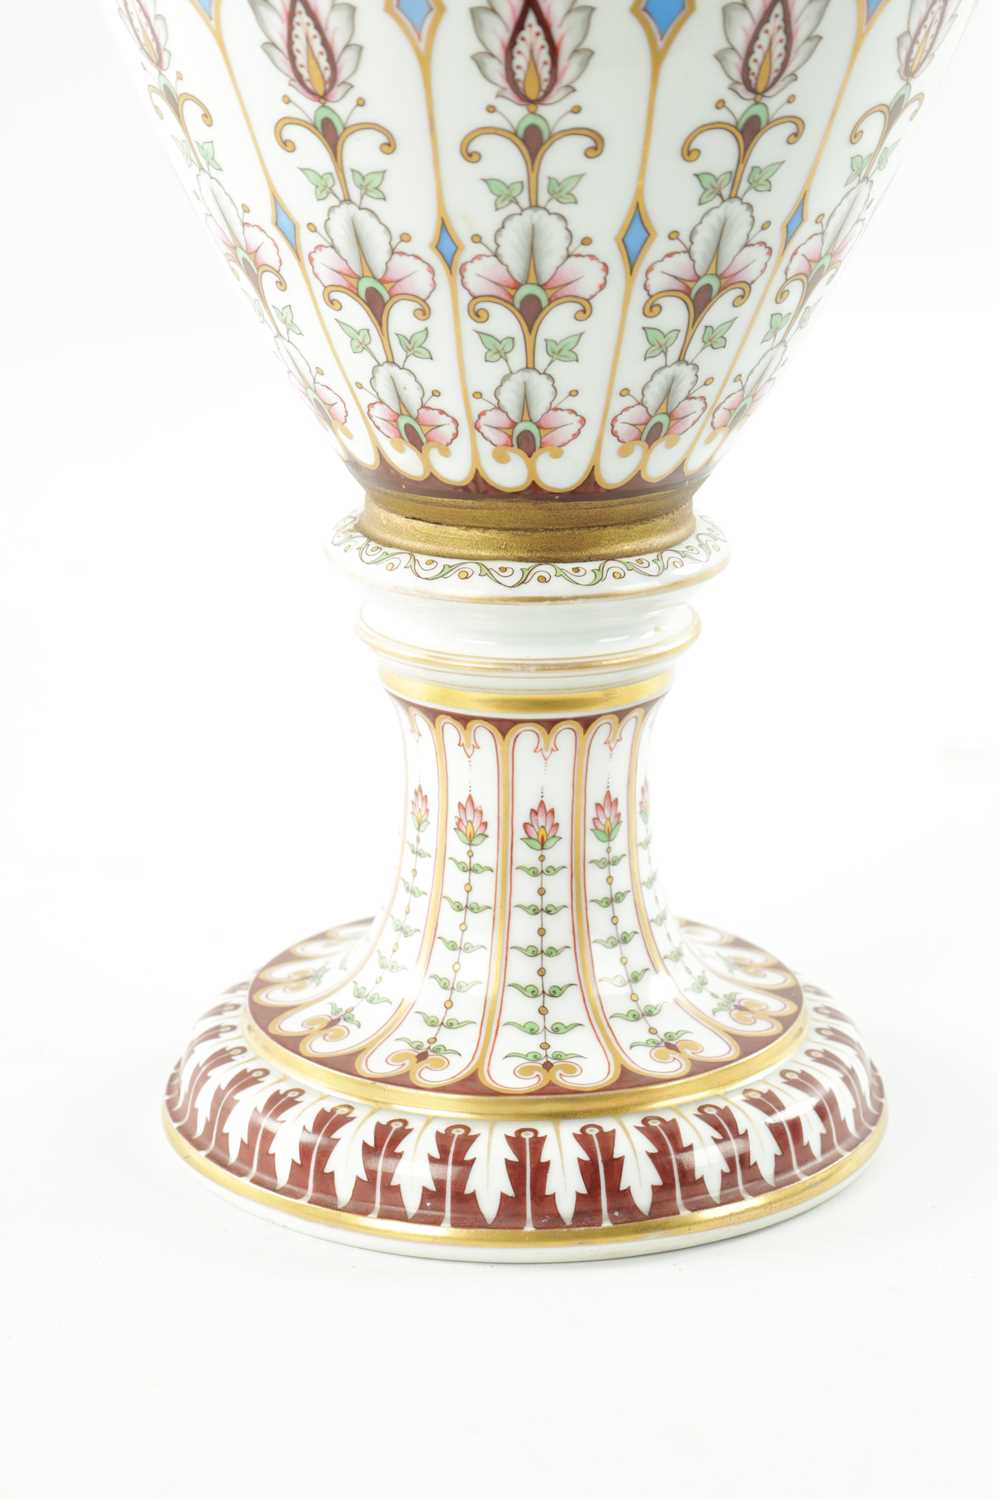 A LARGE LATE 19TH CENTURY PORCELAIN VASE POSSIBLY RUSSIAN - Image 5 of 8